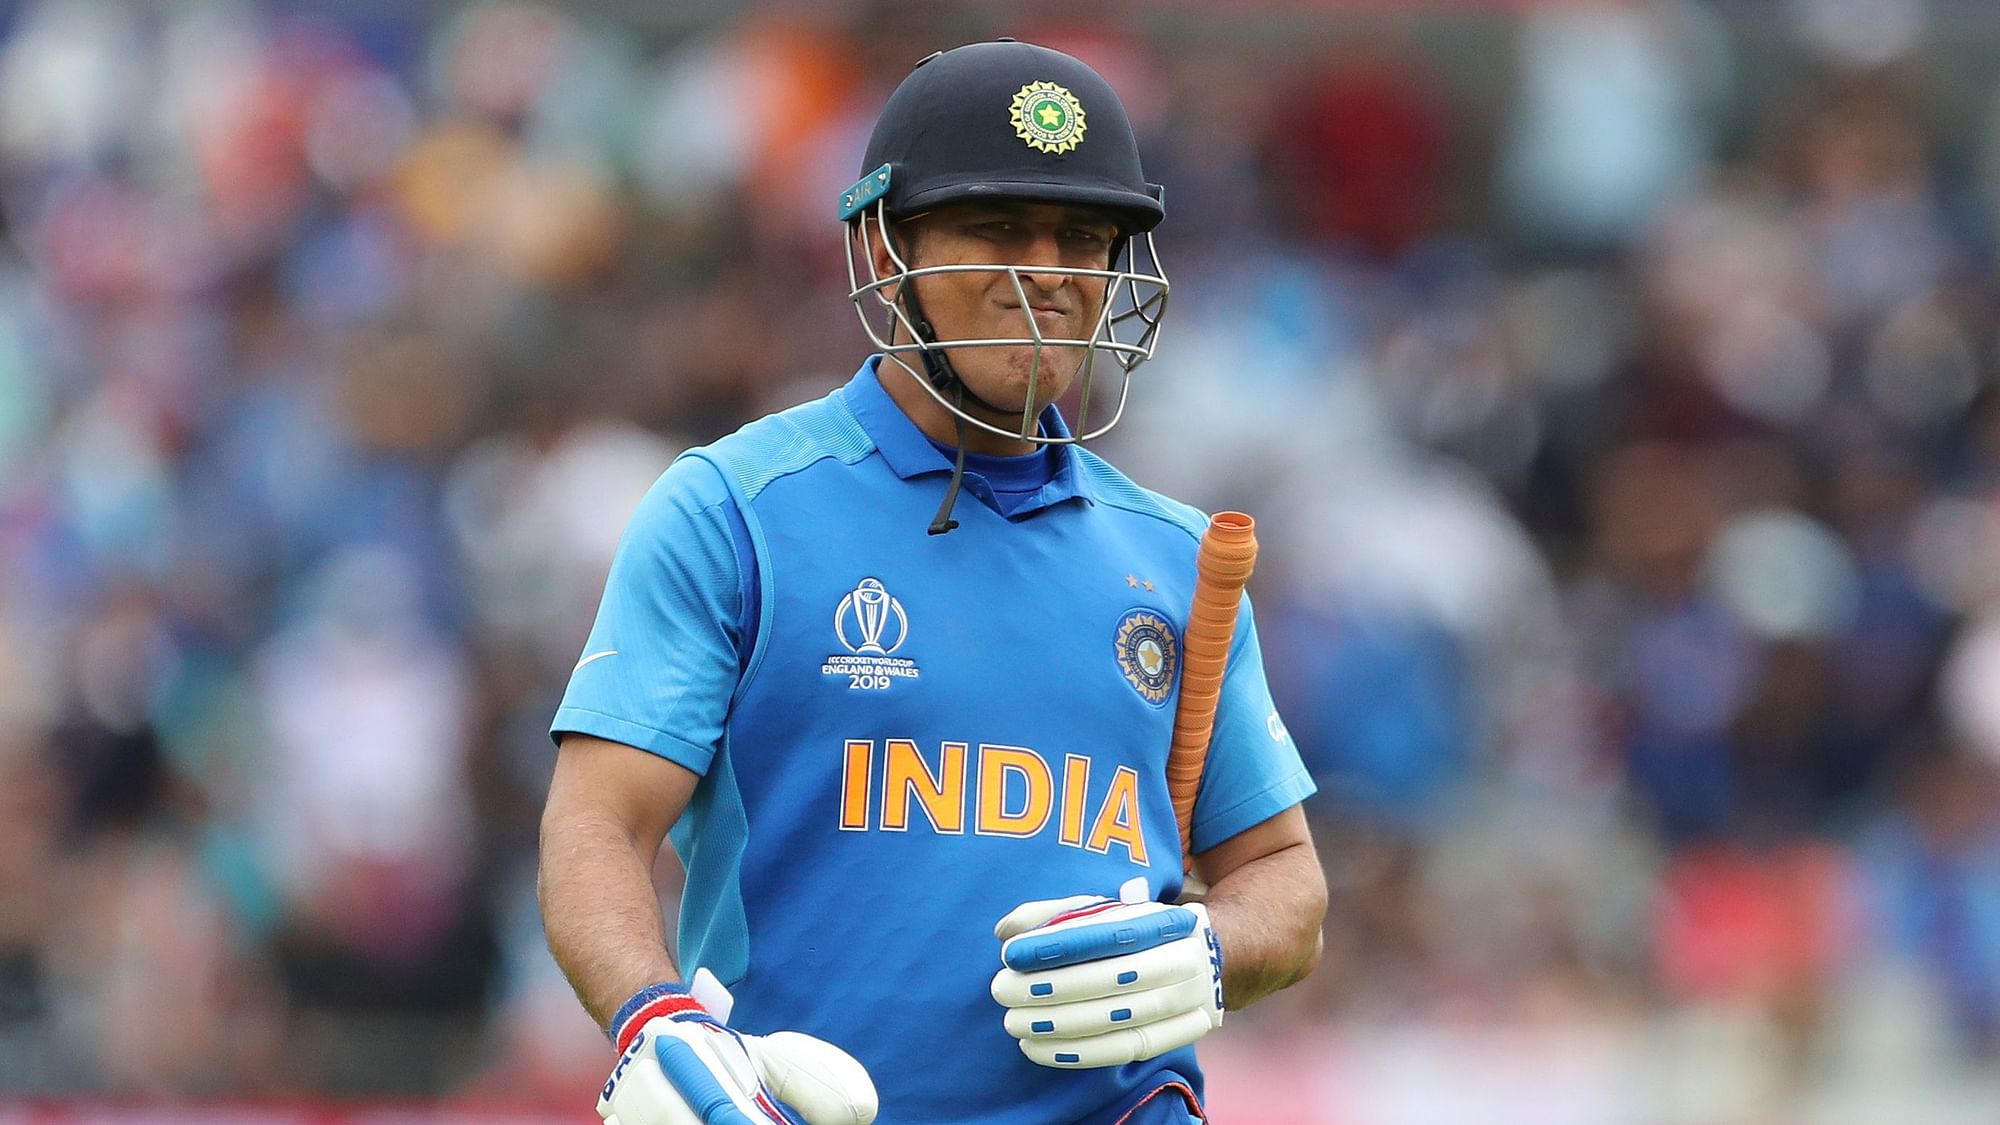 MS Dhoni’s experience as an international cricketer was considered as a big plus for India coming into this World Cup.